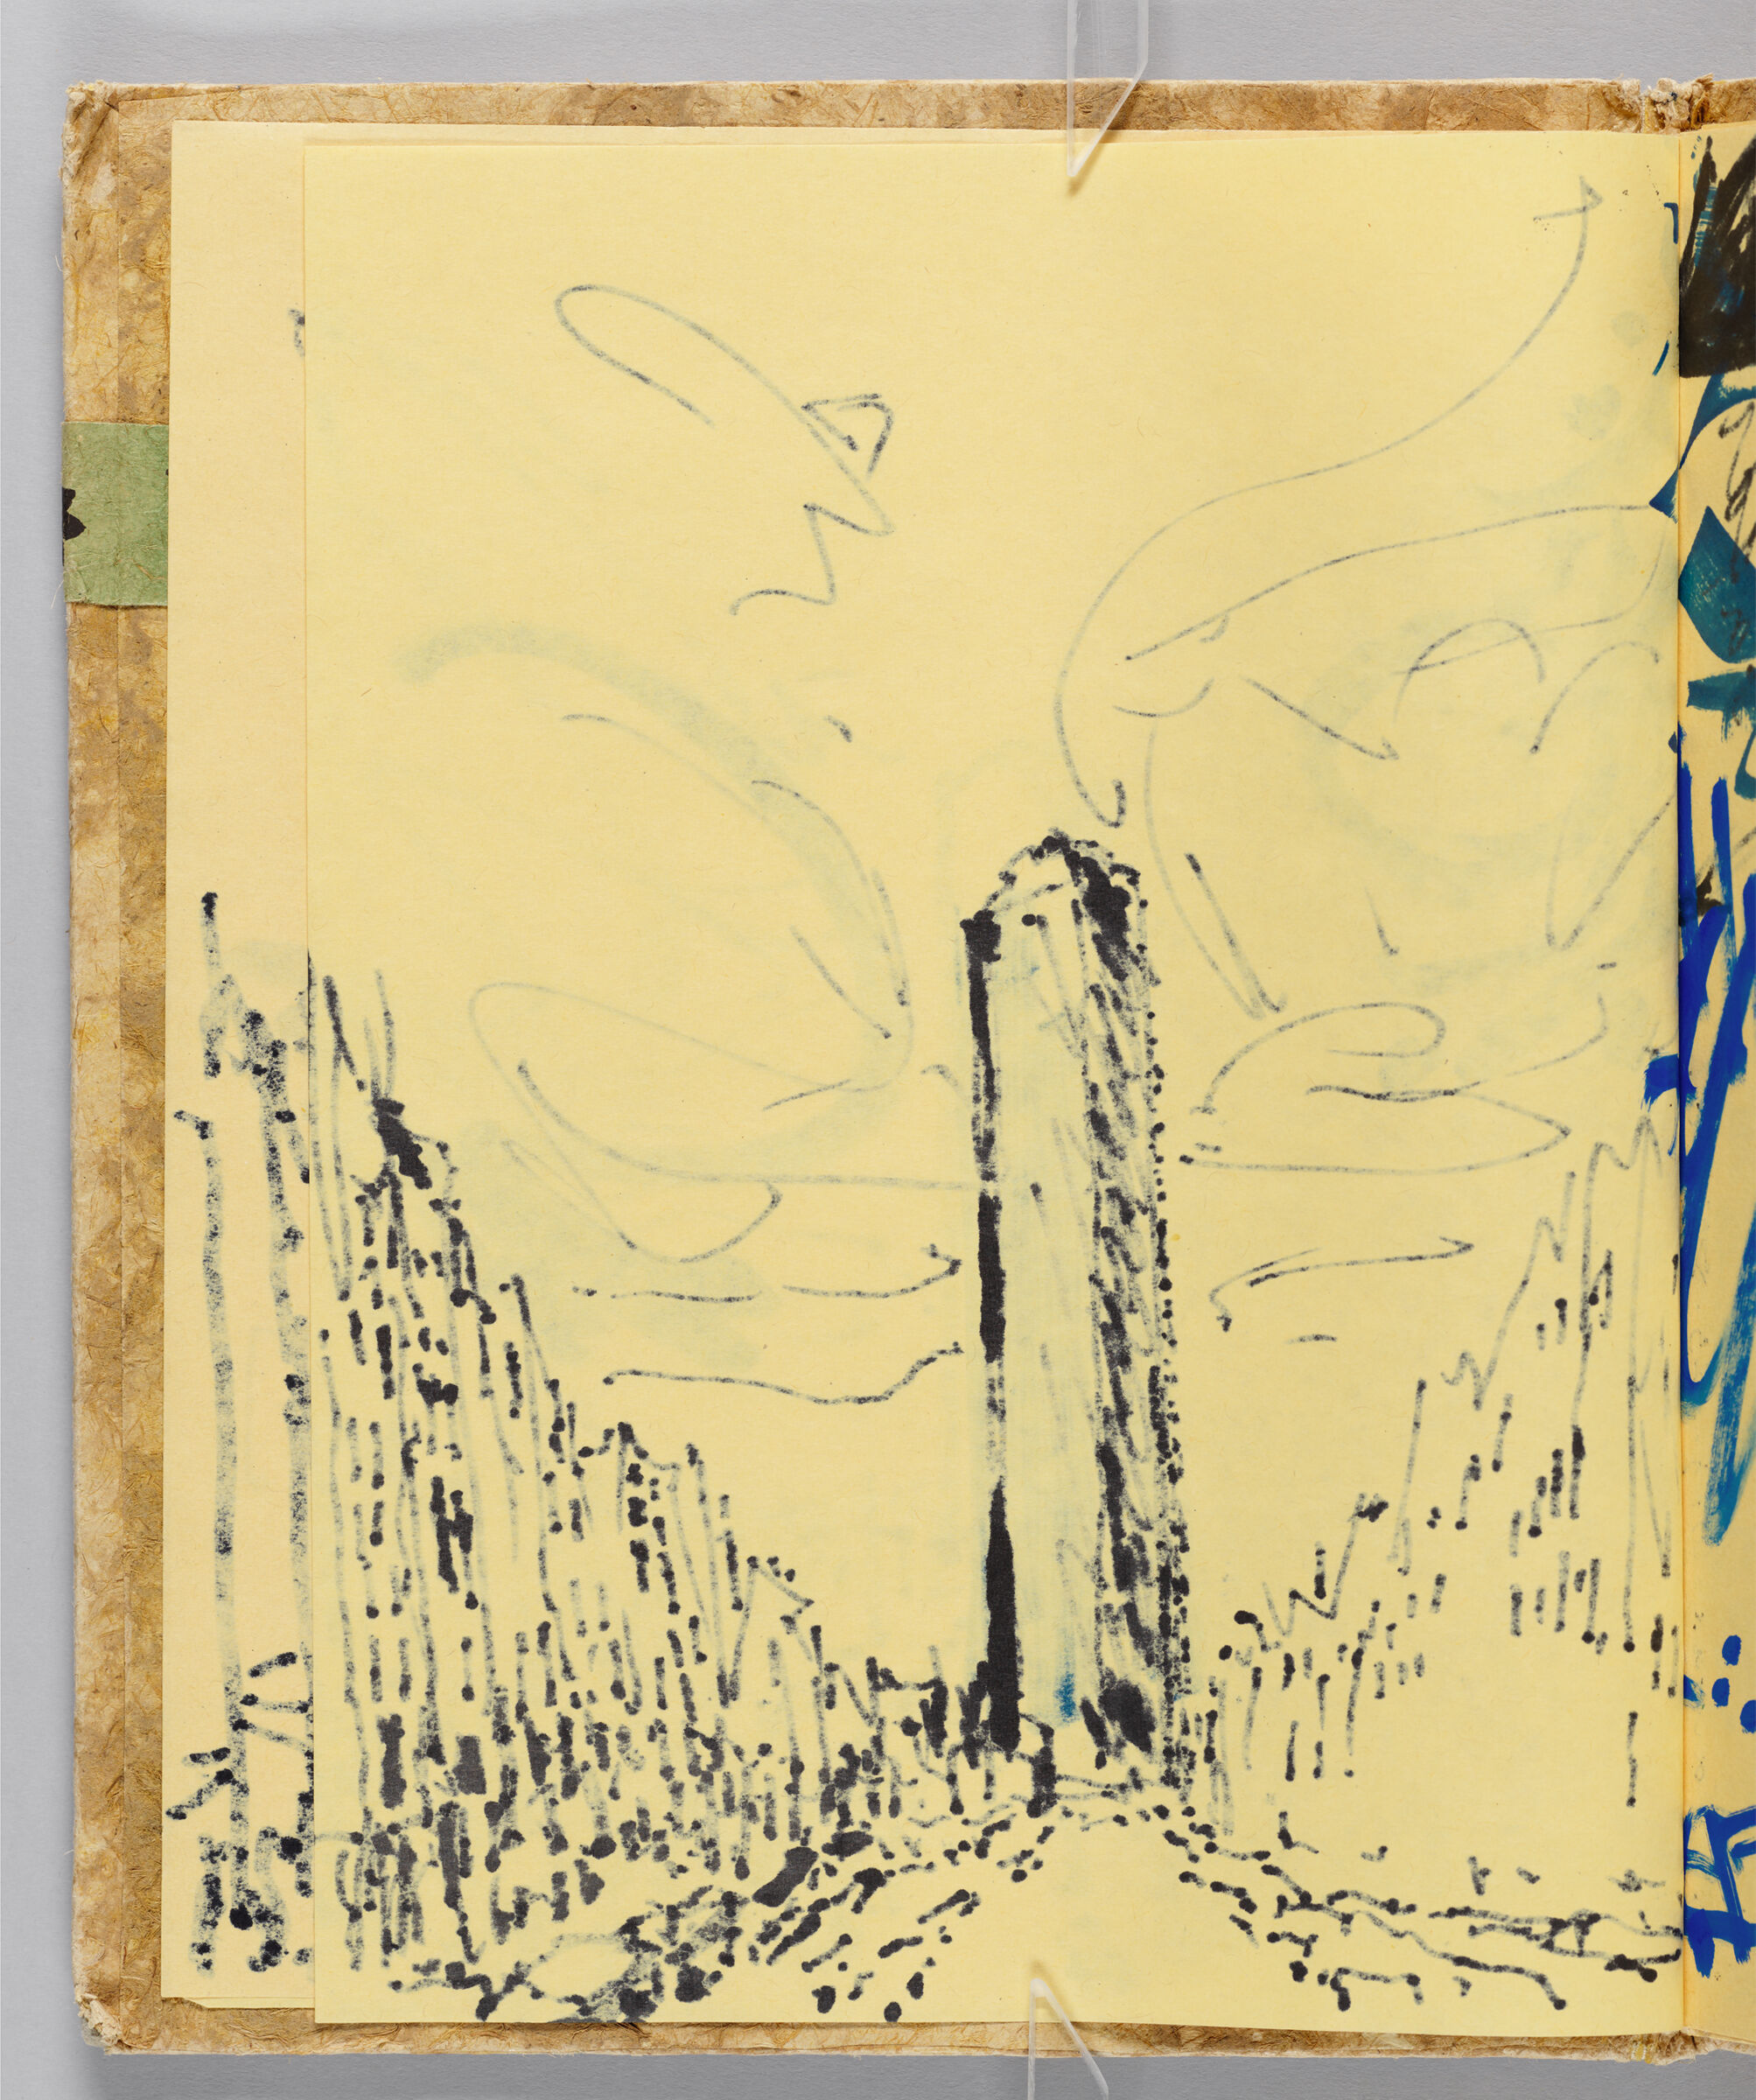 Untitled (Bleed-Through Of Previous Page, Left Page); Untitled (Montparnasse Tower, Right Page)